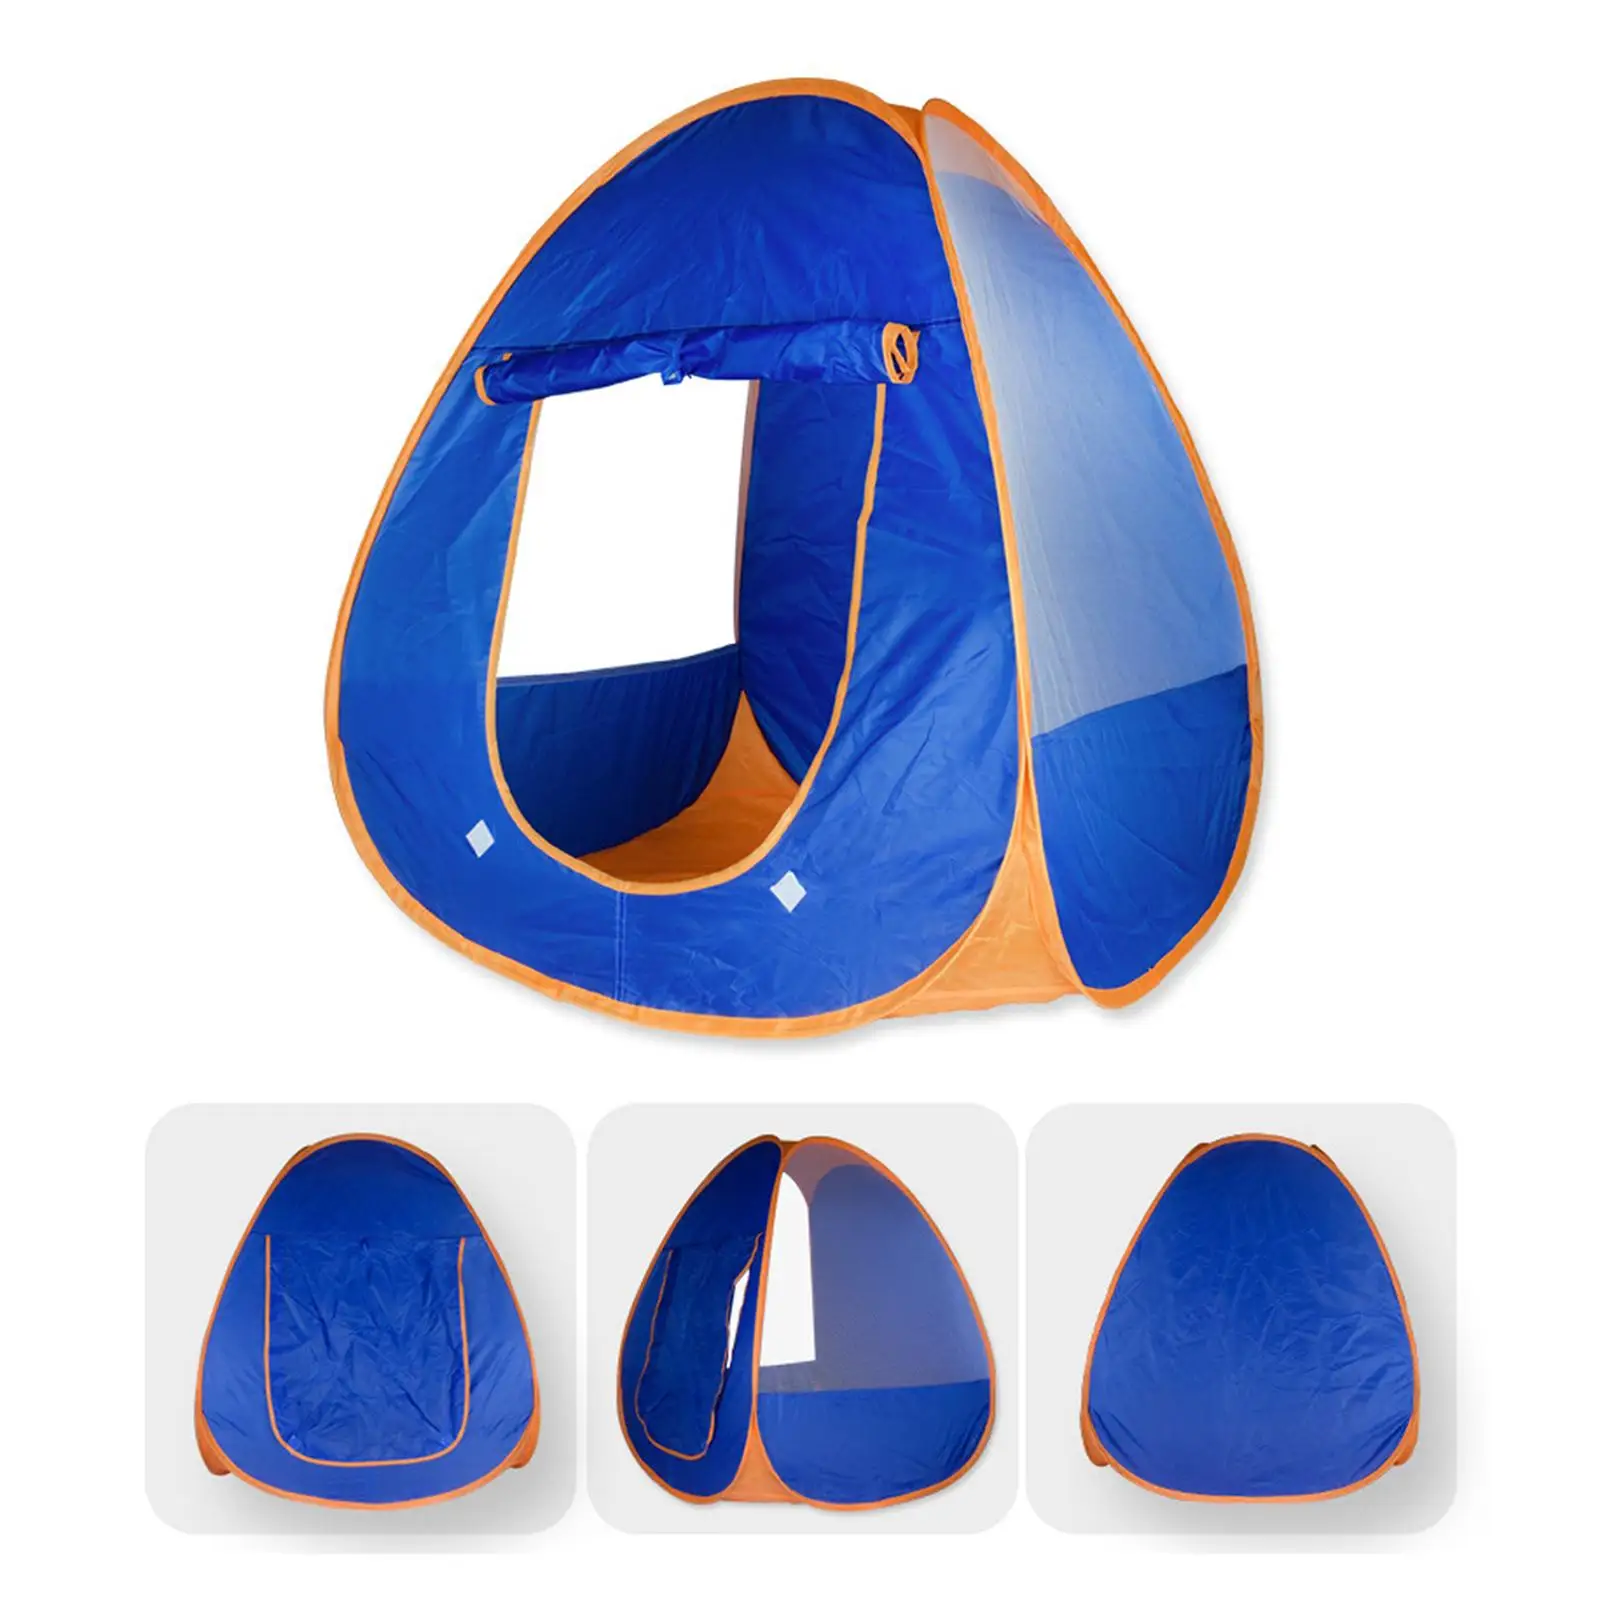 Kids Play Tent Foldable Pretend Play Playhouse Toys Birthday Gifts Child Room Decor for Game Indoor Outdoor Camping Beach